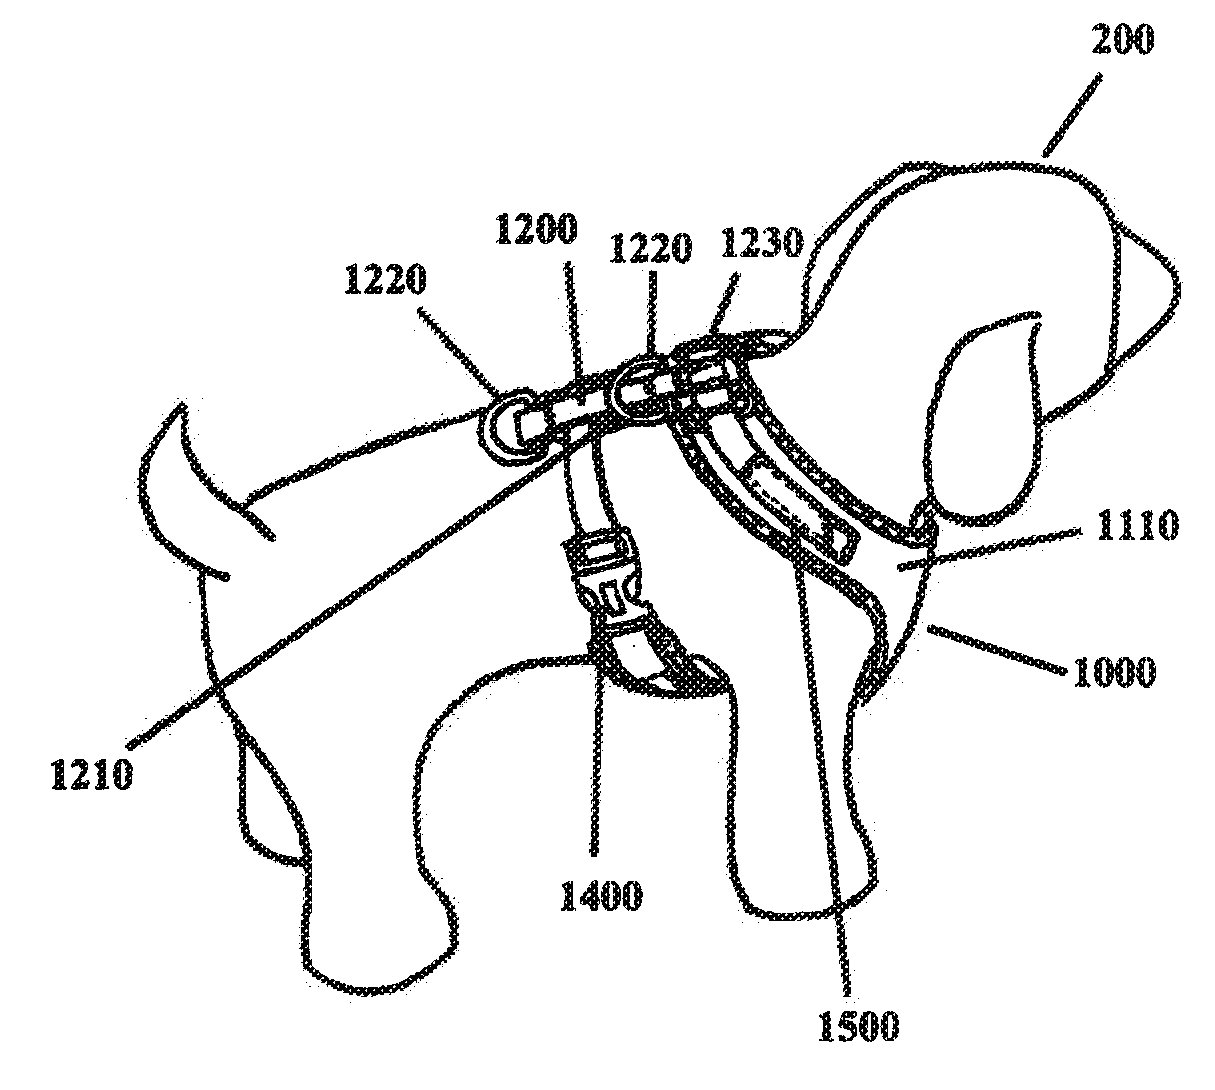 Non-choking harness for pet